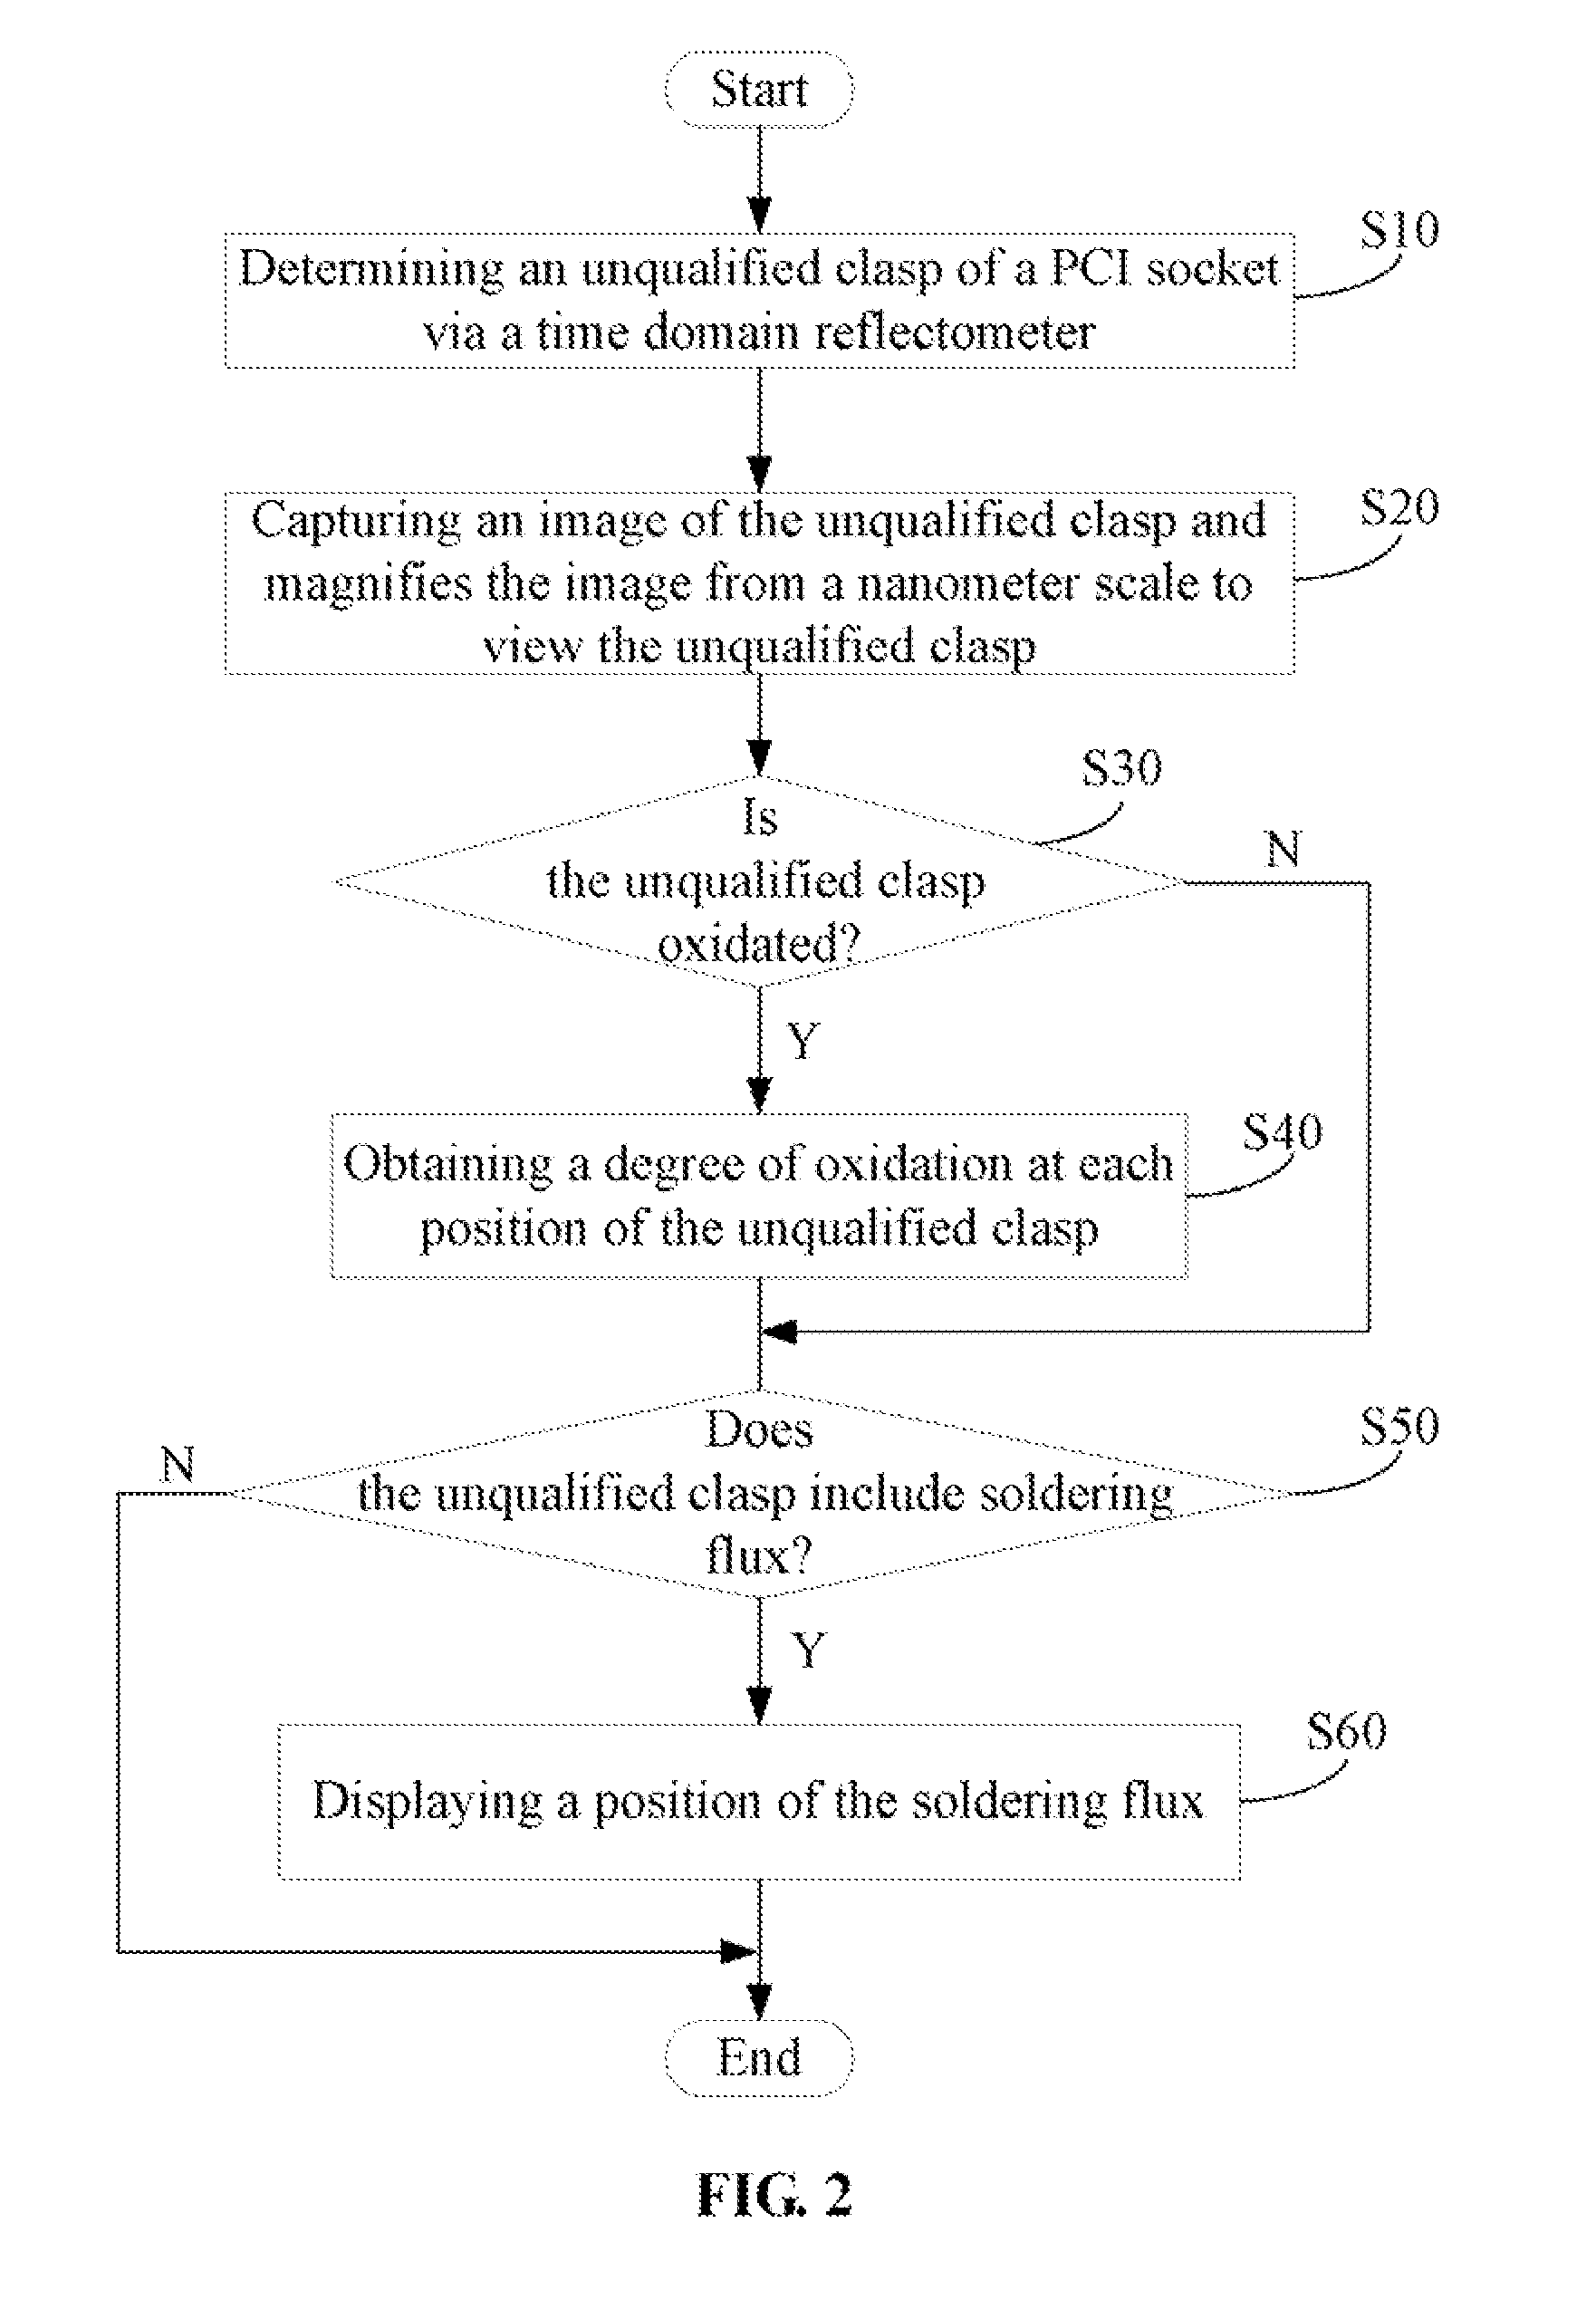 Method for analyzing peripheral component interconnect sockets